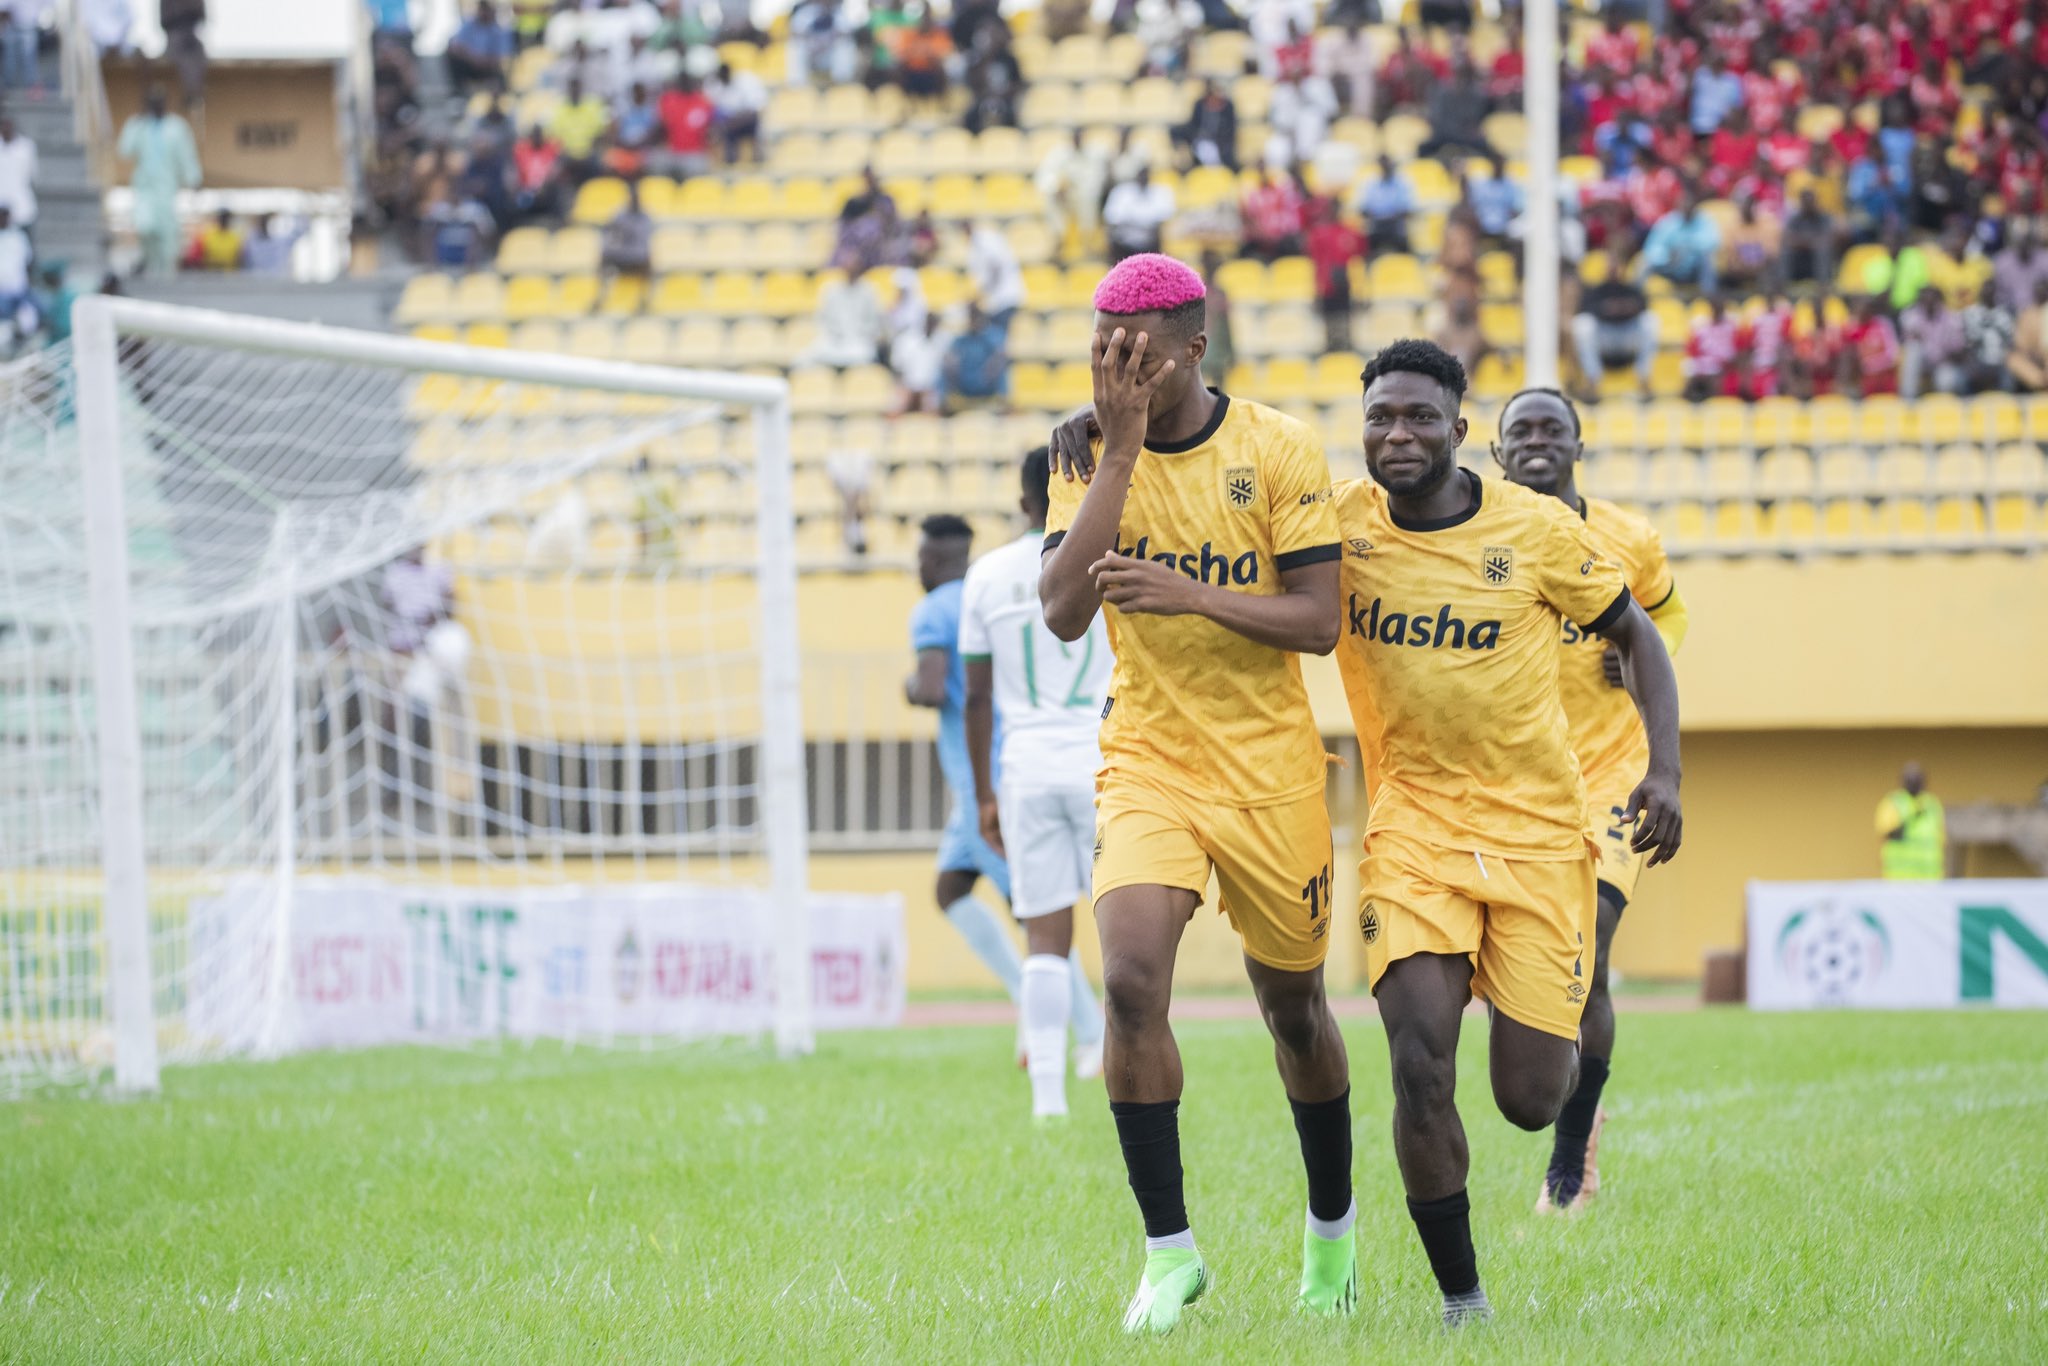 NPFL: Jonathan Alukwu scores as noisy Lagosians fall to defeat in opposition to Kwara United